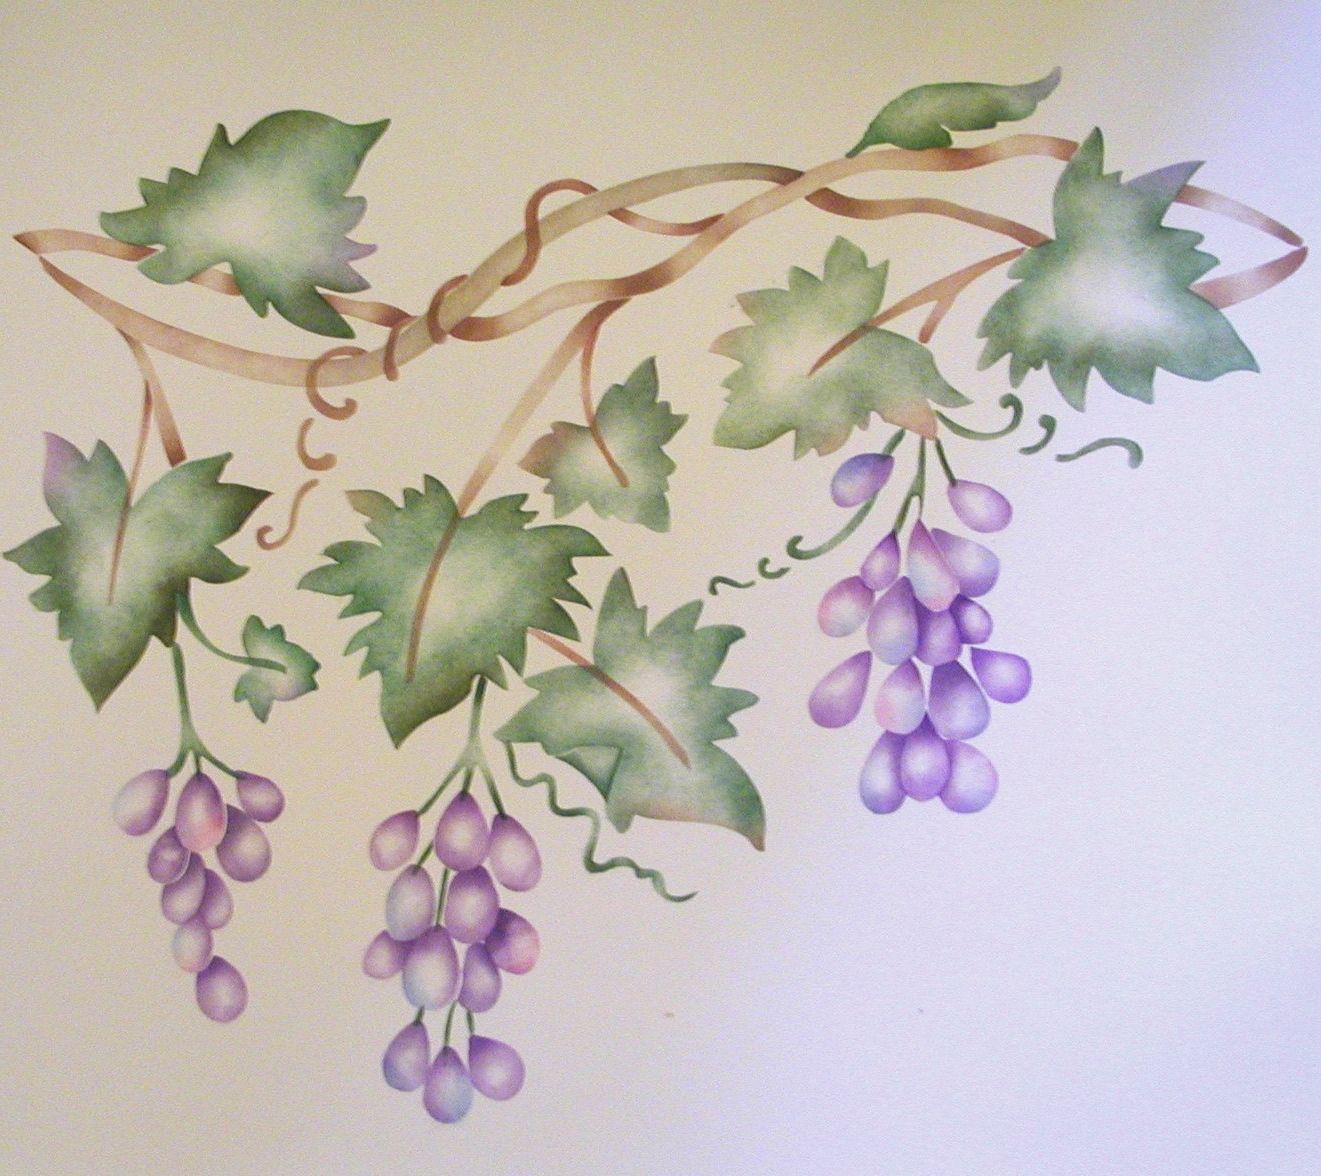 Widely Used Stencil Grape Vine Border Wall Stencil Painting Stencil Throughout Grape Vineyard Wall Art (View 9 of 15)